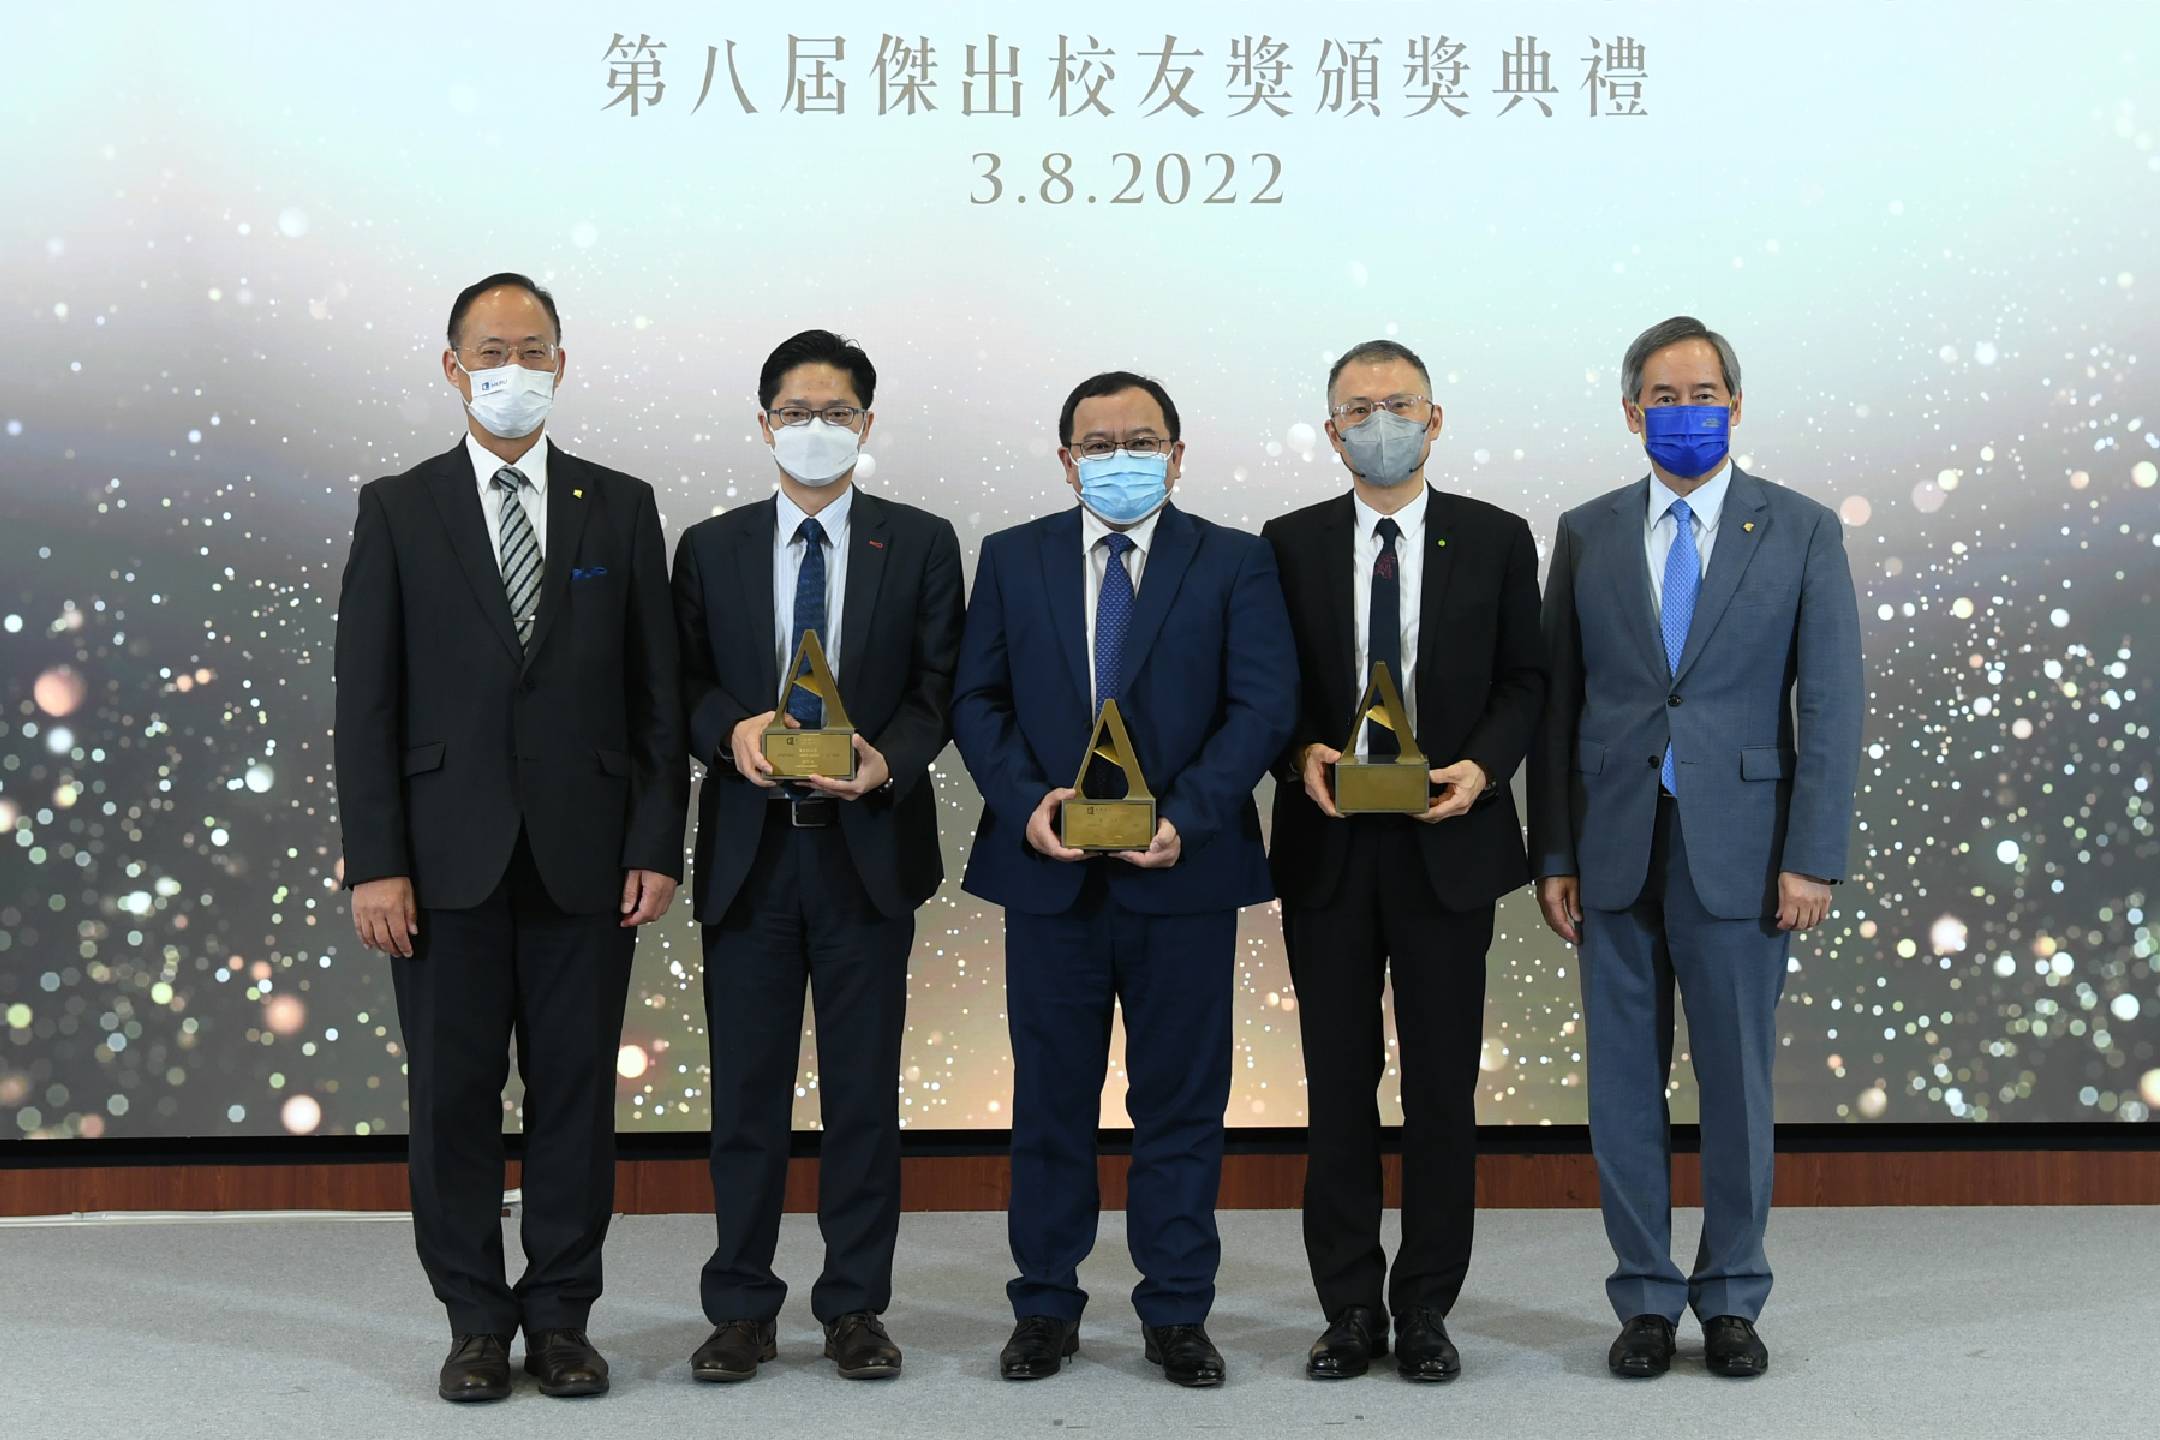 (From left) Professor Alexander Wai, President and Vice-Chancellor; Distinguished Alumni Award recipients Professor Leo Poon Lit-man, Professor Chan Wing-kwong, and Mr Patrick Tsang Shun-fuk; and Dr Clement Chen, Chairman of the Council and the Court .